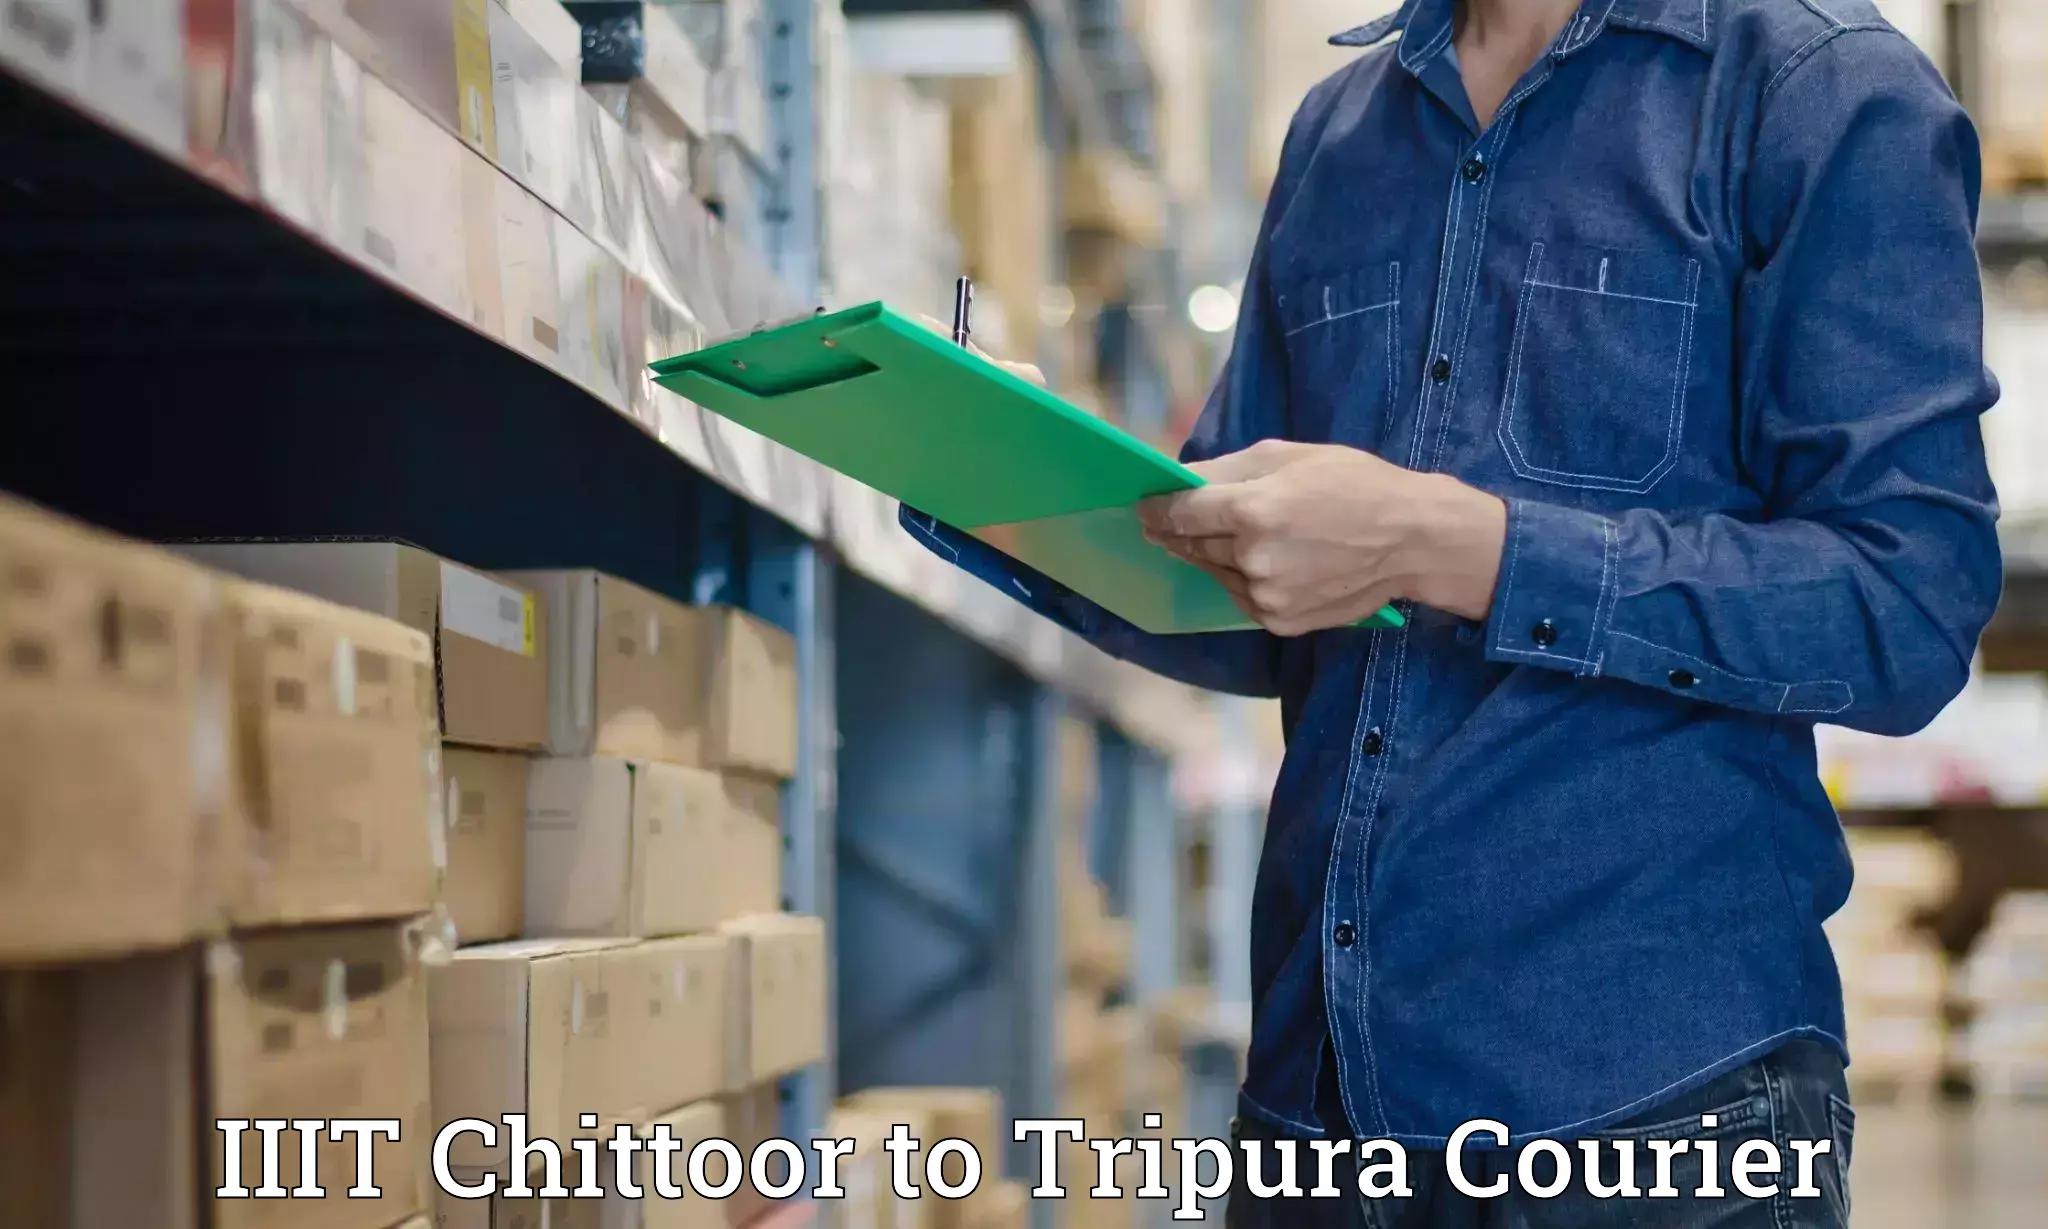 Comprehensive shipping services in IIIT Chittoor to Udaipur Tripura